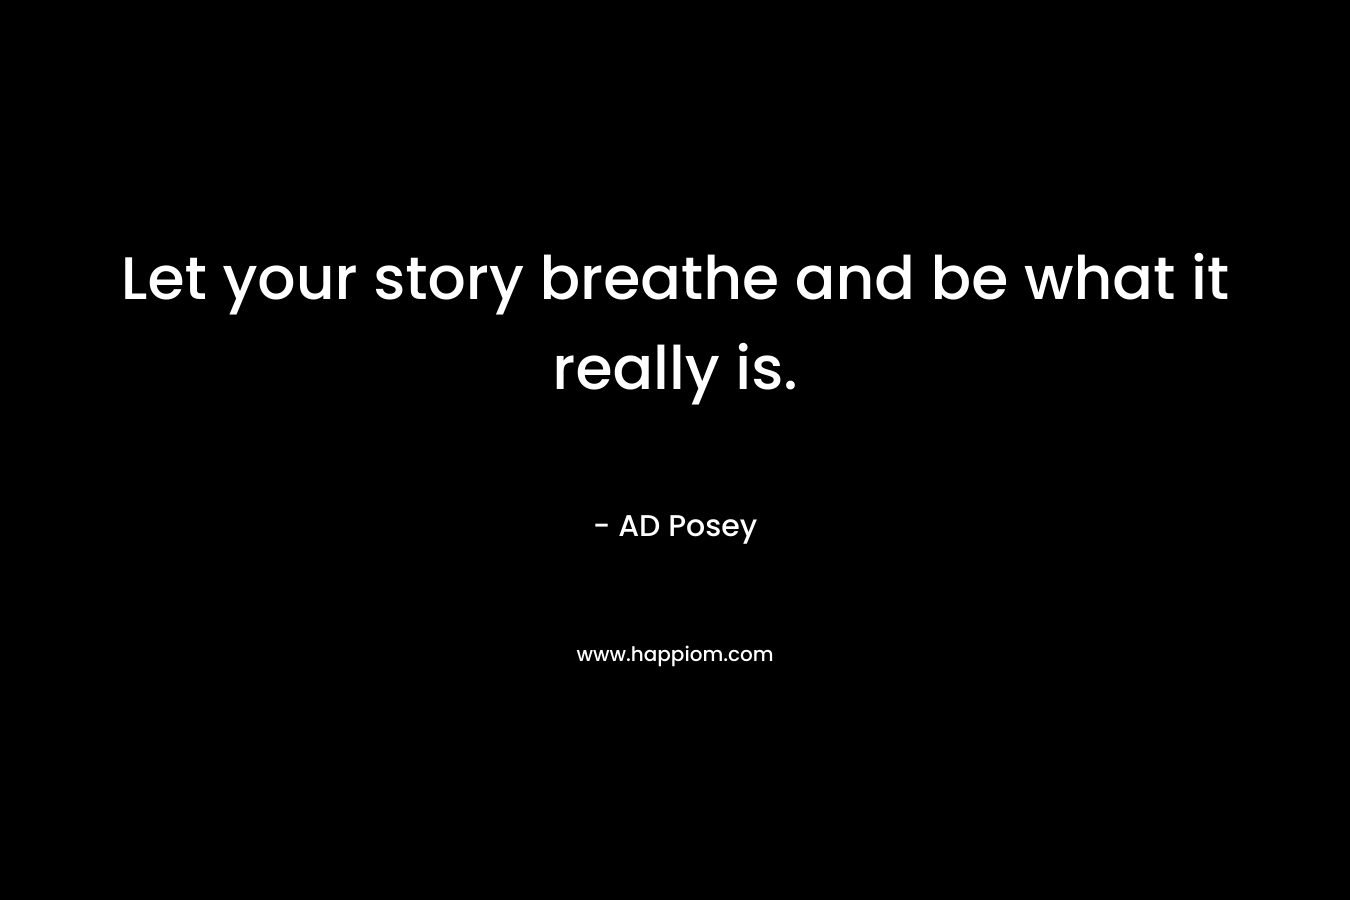 Let your story breathe and be what it really is. – AD Posey